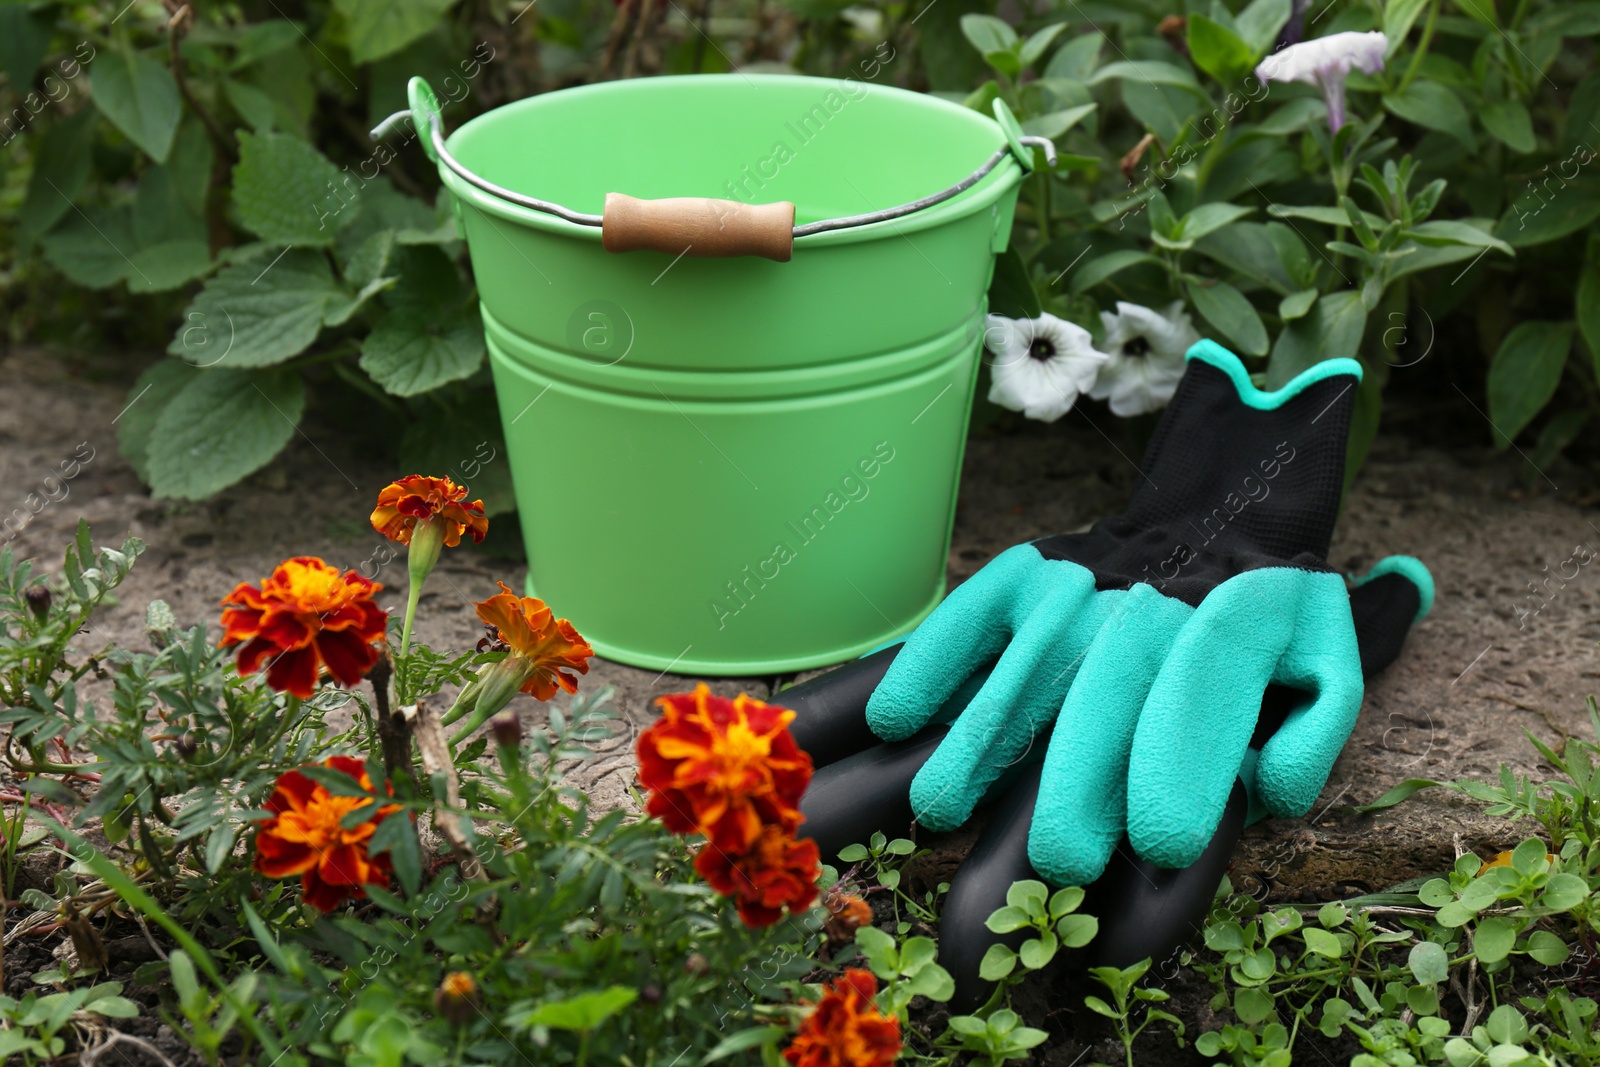 Photo of Gardening gloves and green bucket near flowers outdoors